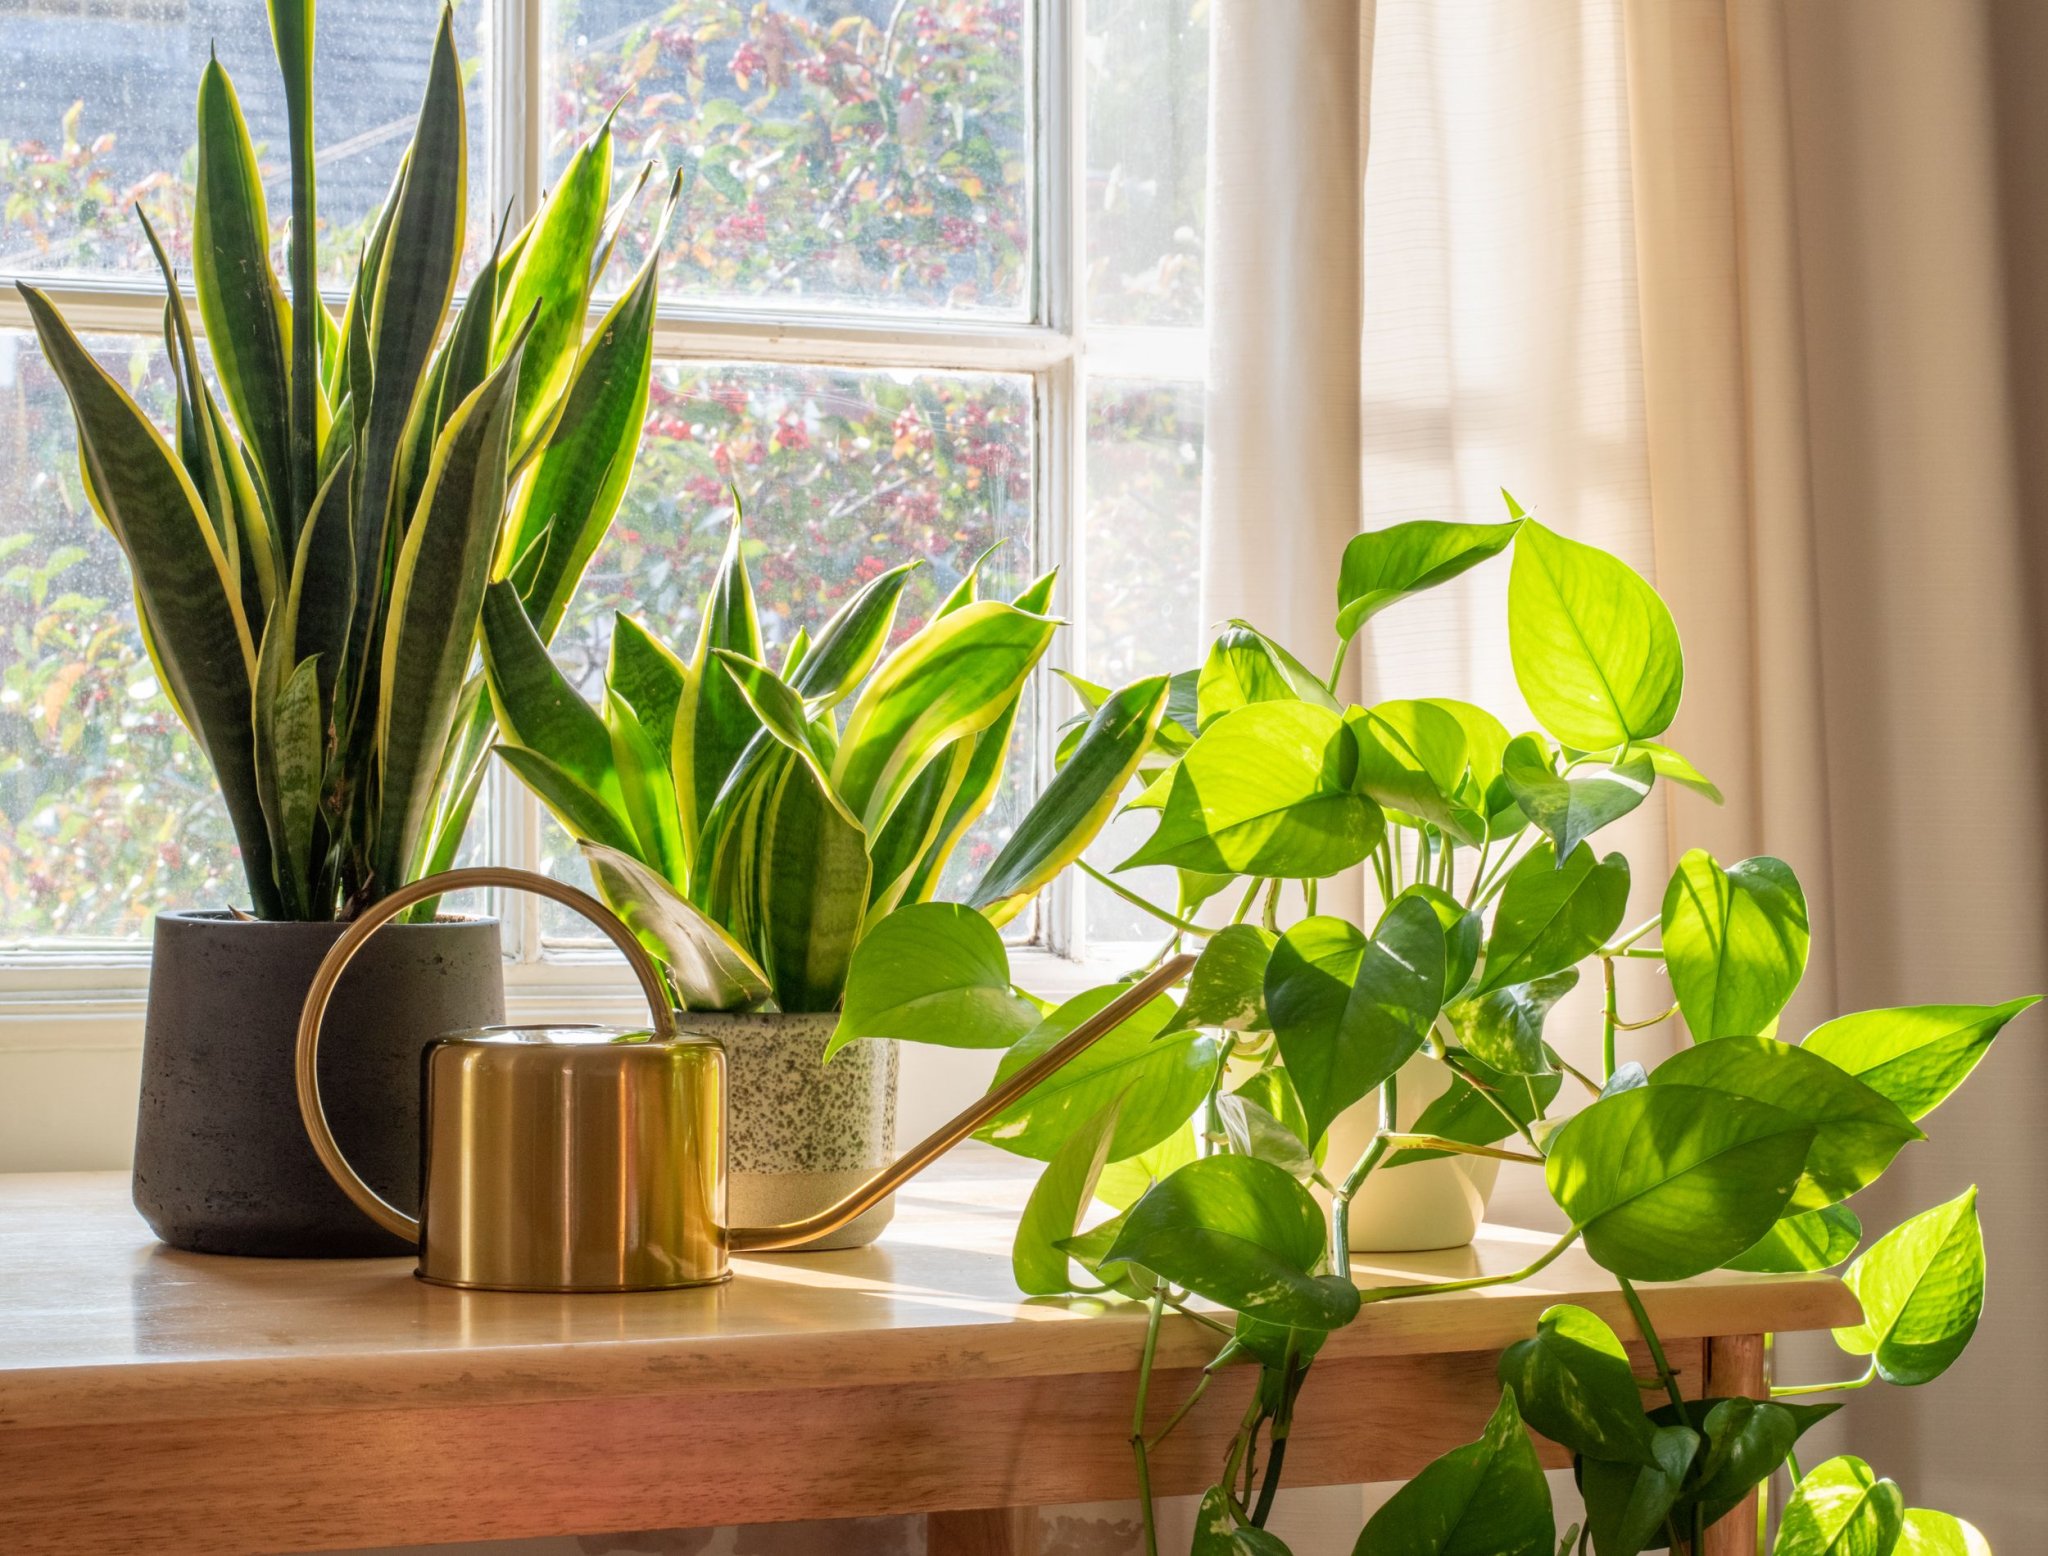 12 Plants You Should Not Grow Indoors and Why